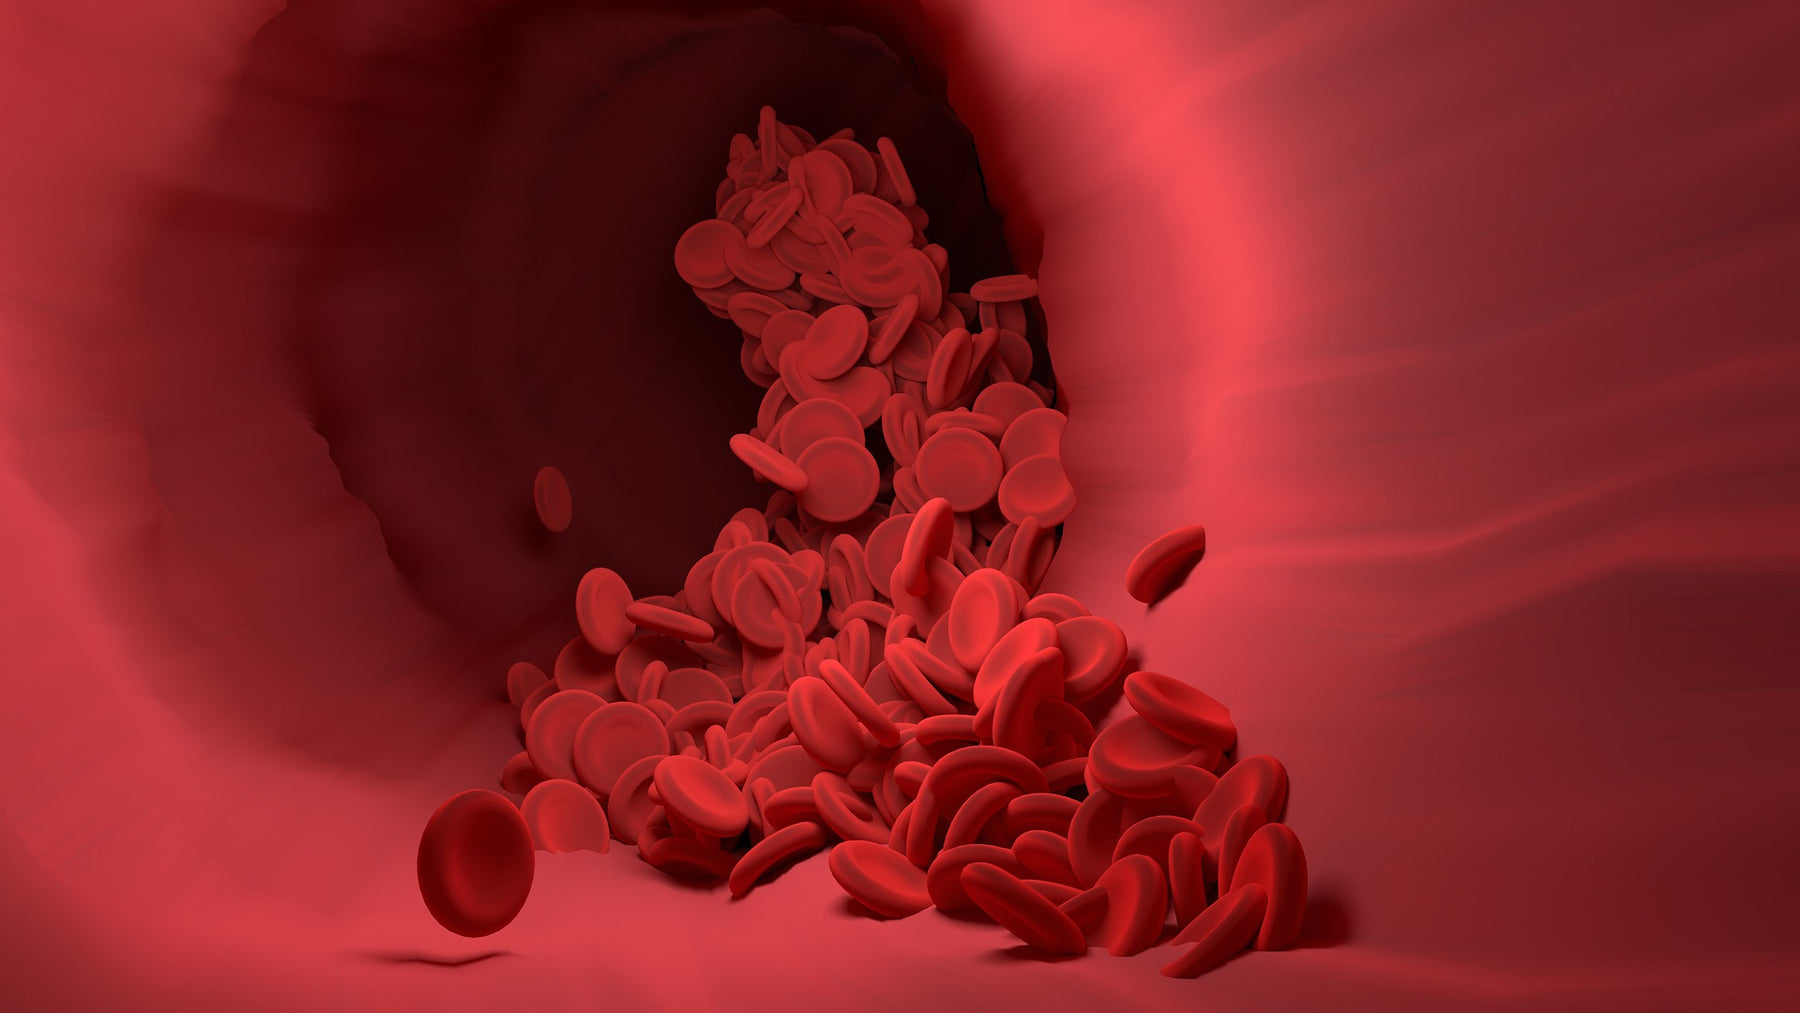 Red blood cells travelling through the body